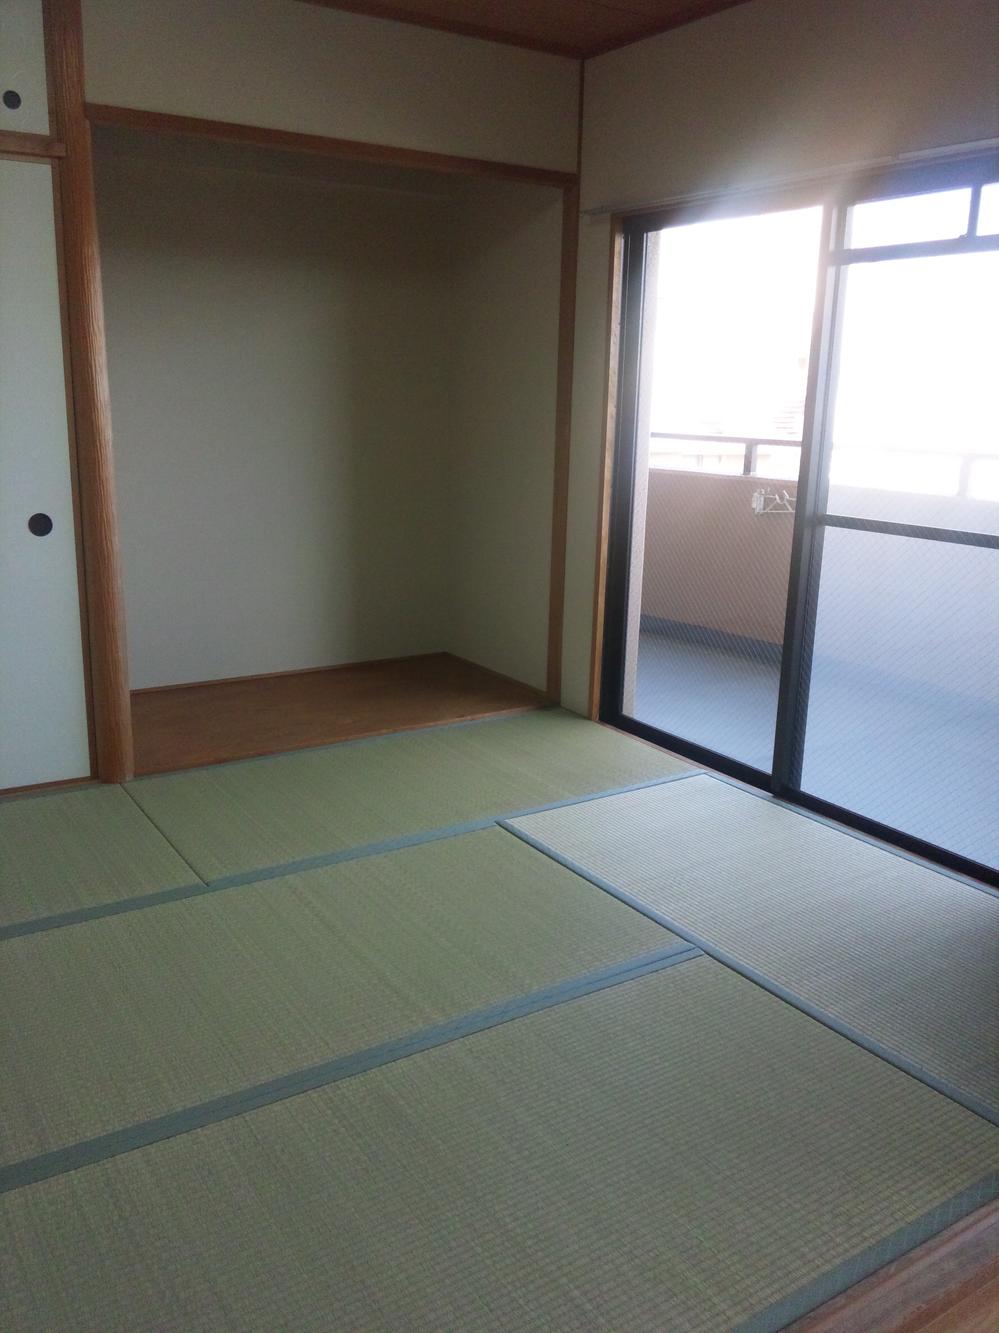 Non-living room. Japanese-style room 6.0 Pledge + is alcove ^^